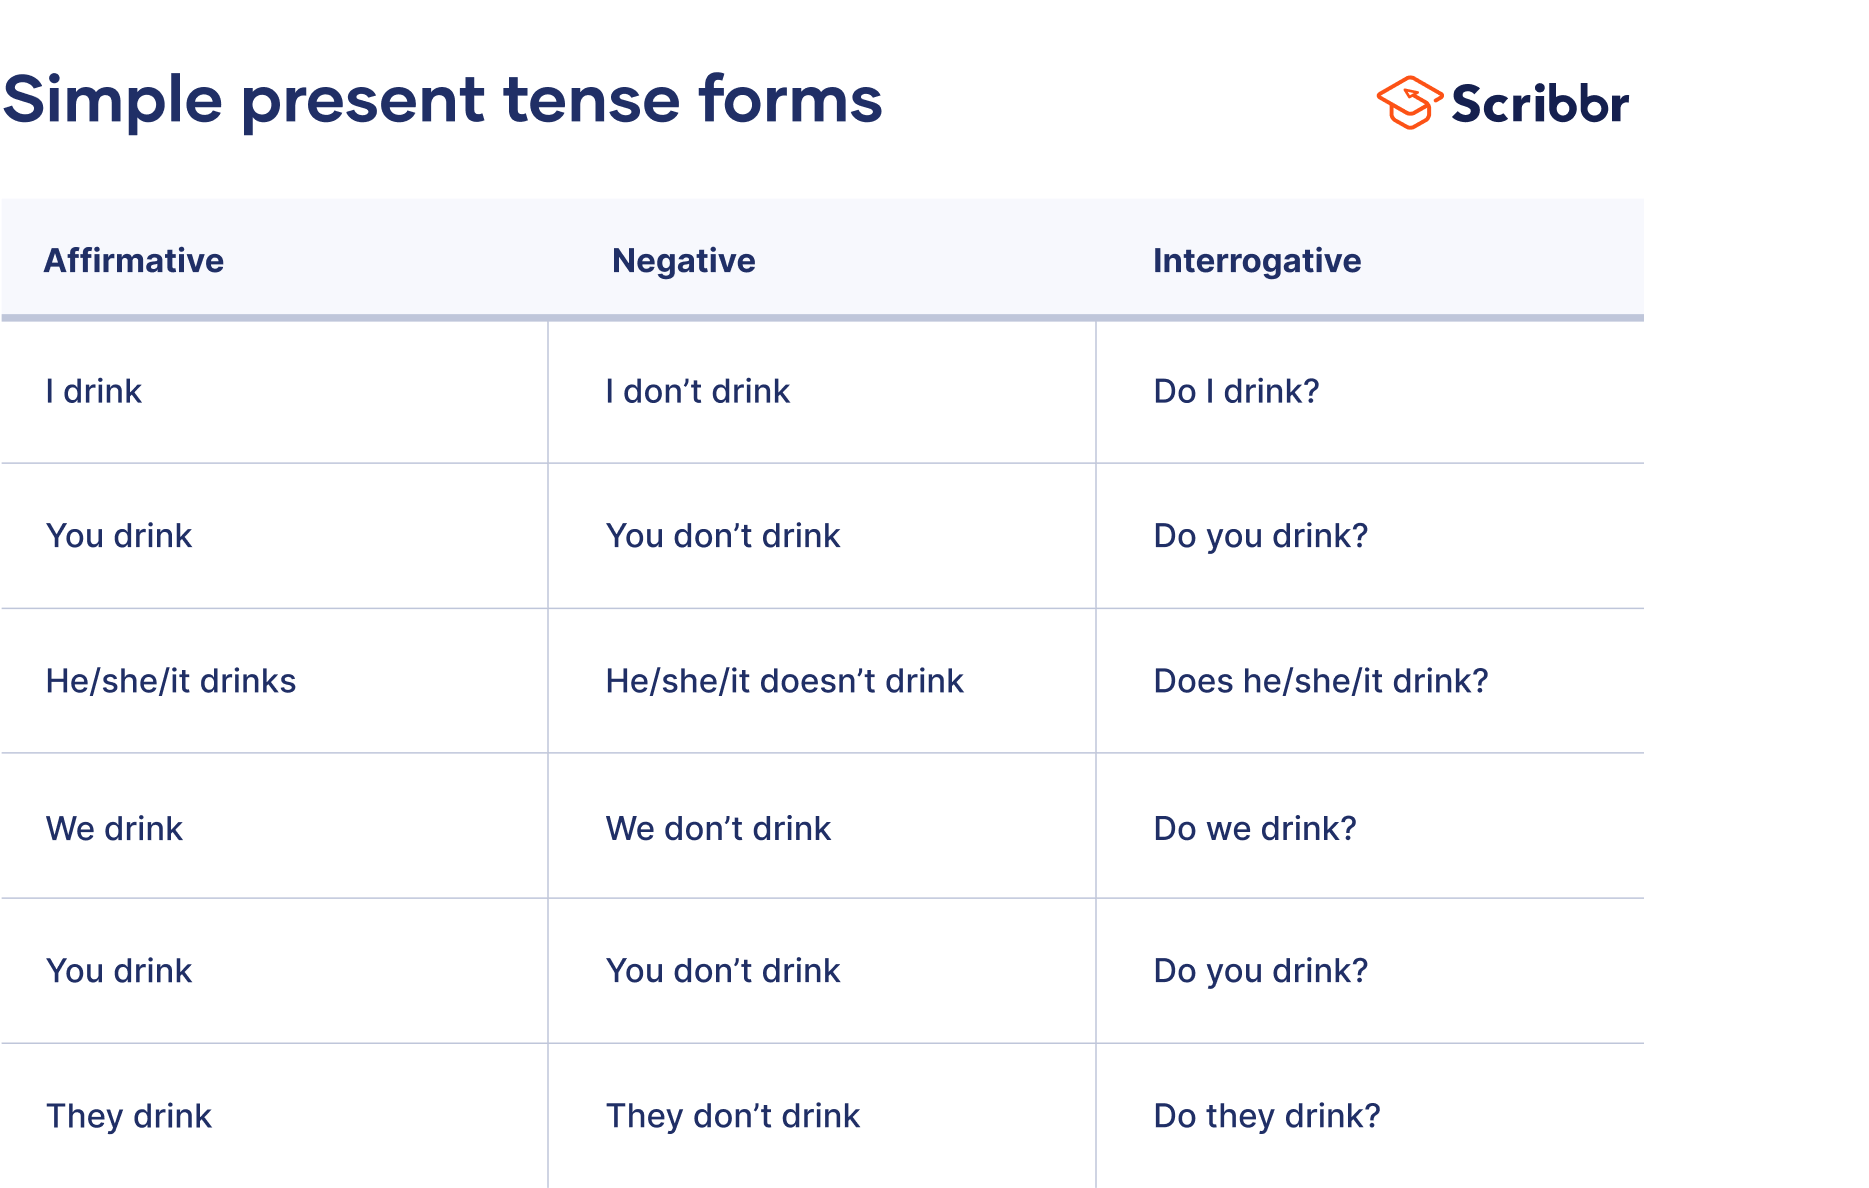 Simple present tense forms